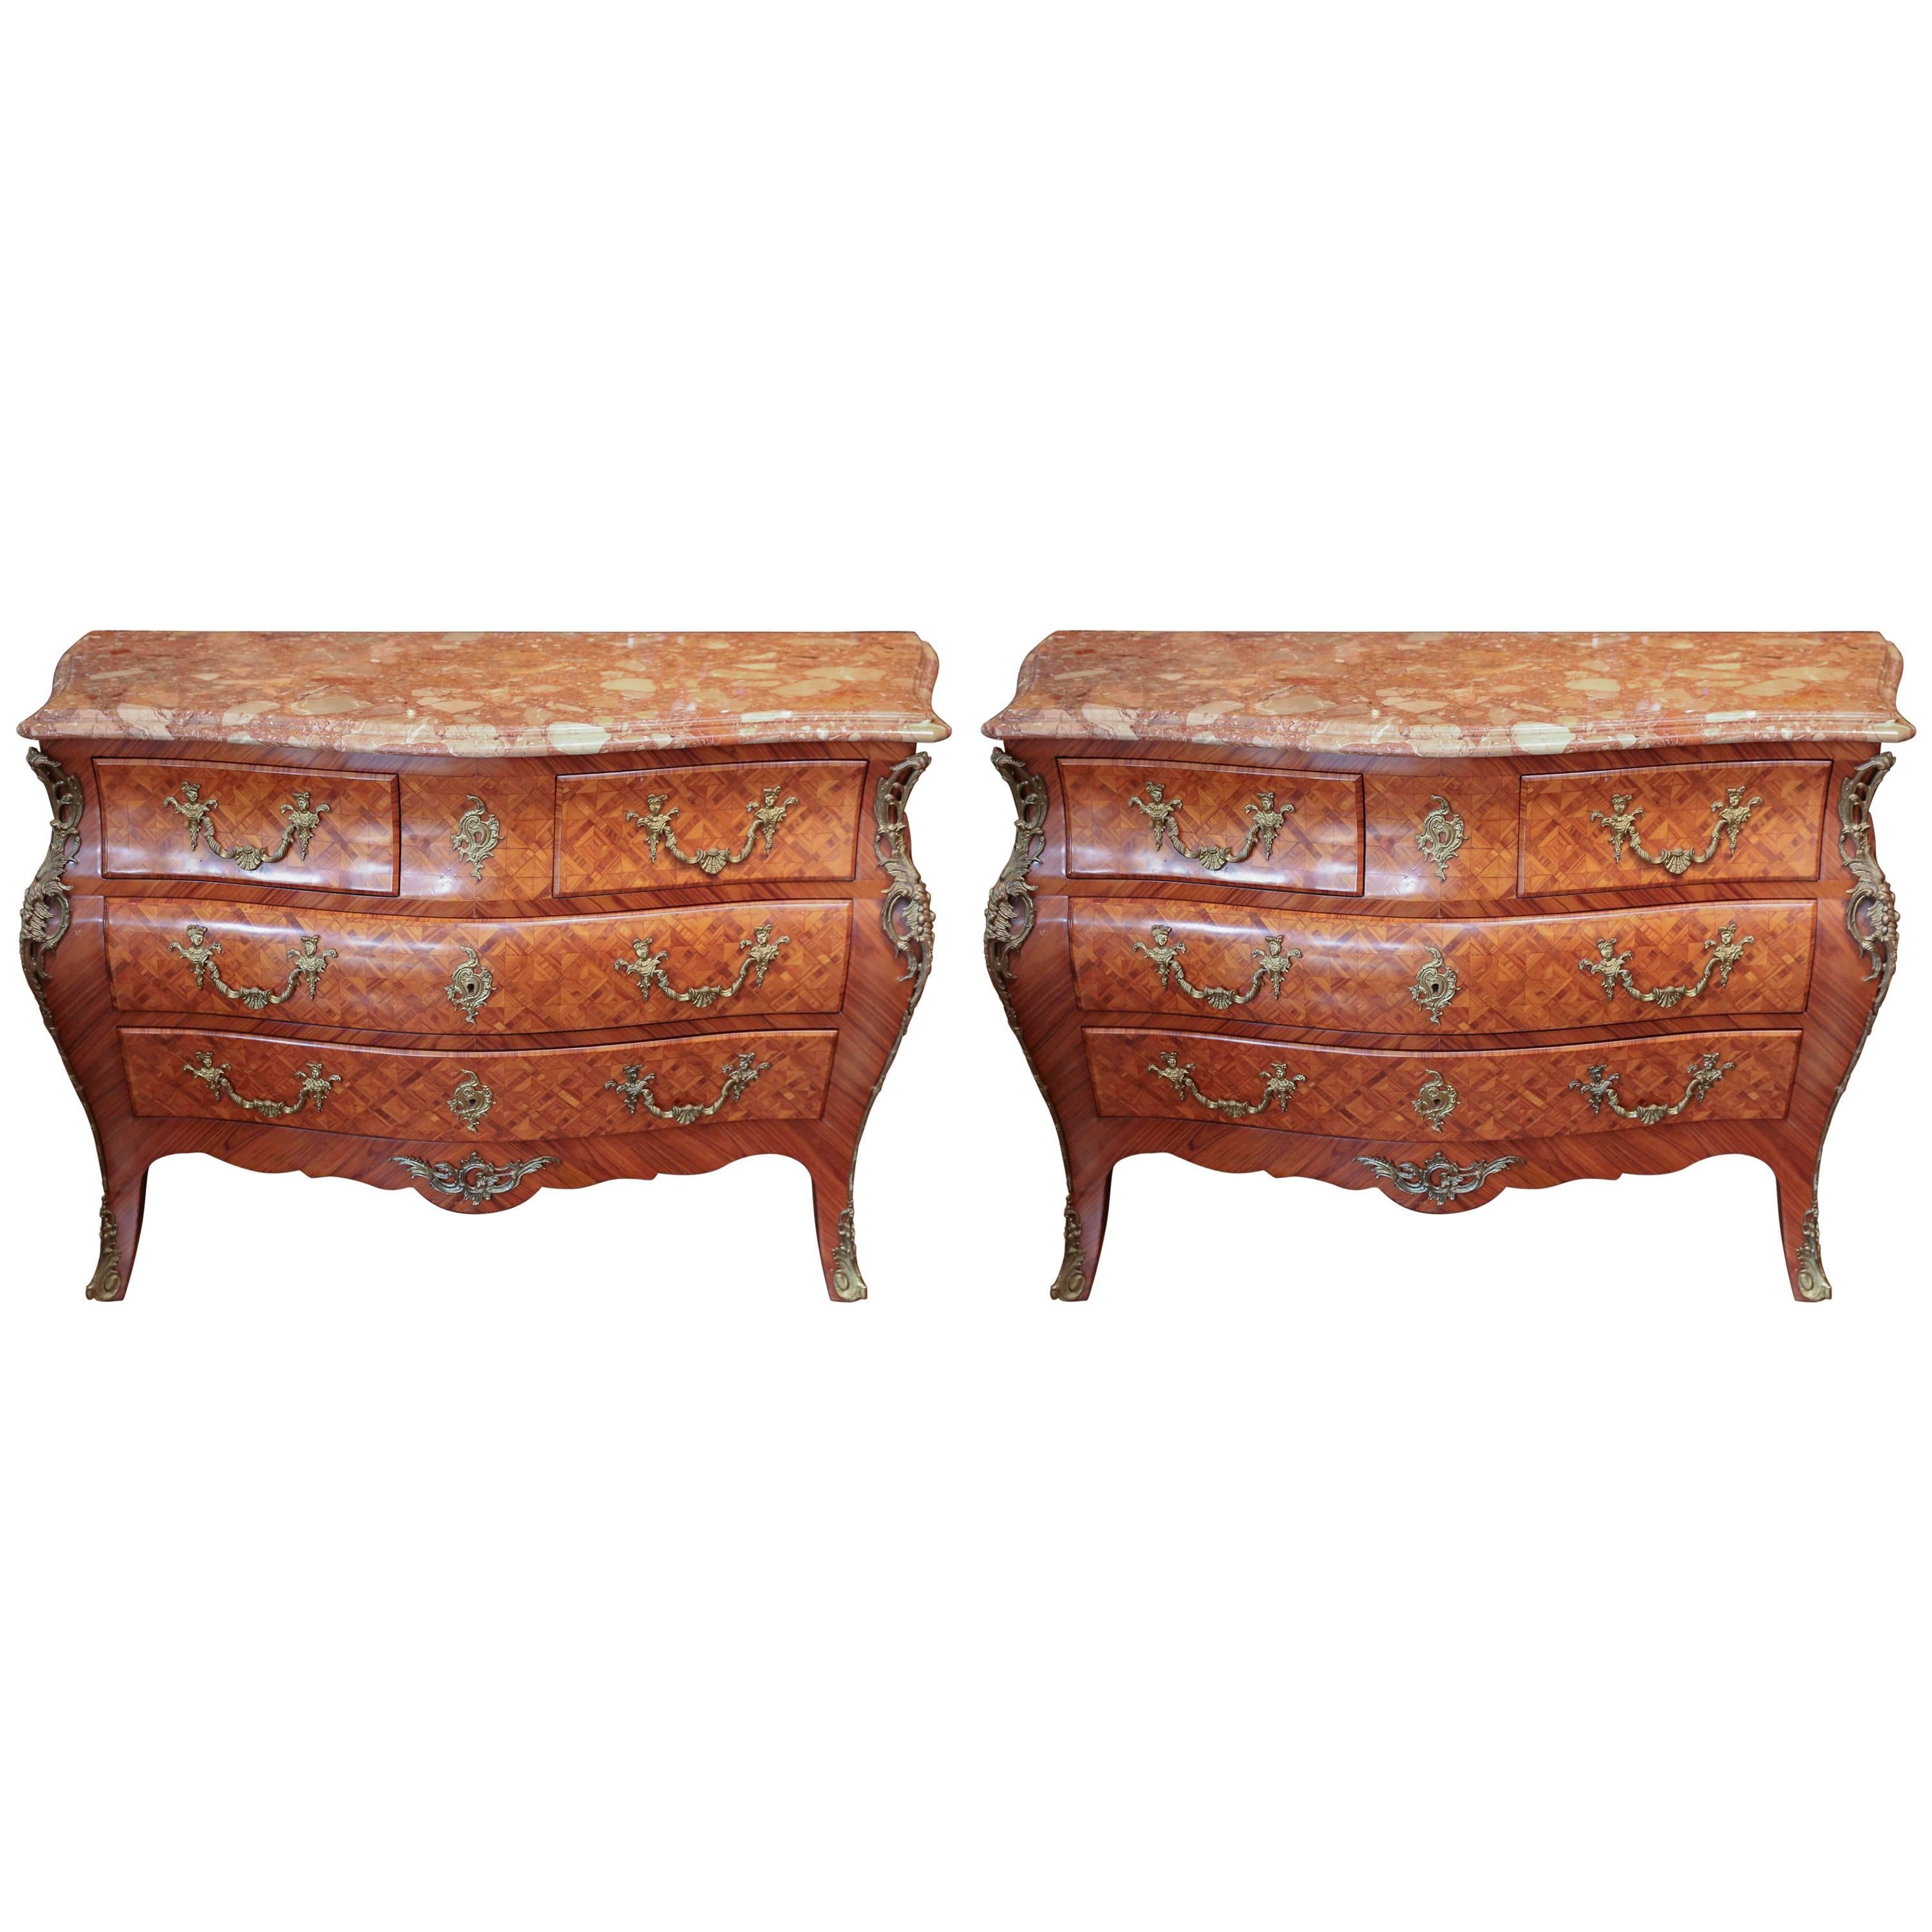 Pair of French Style Bomb'e Shaped Commodes with Marble Tops